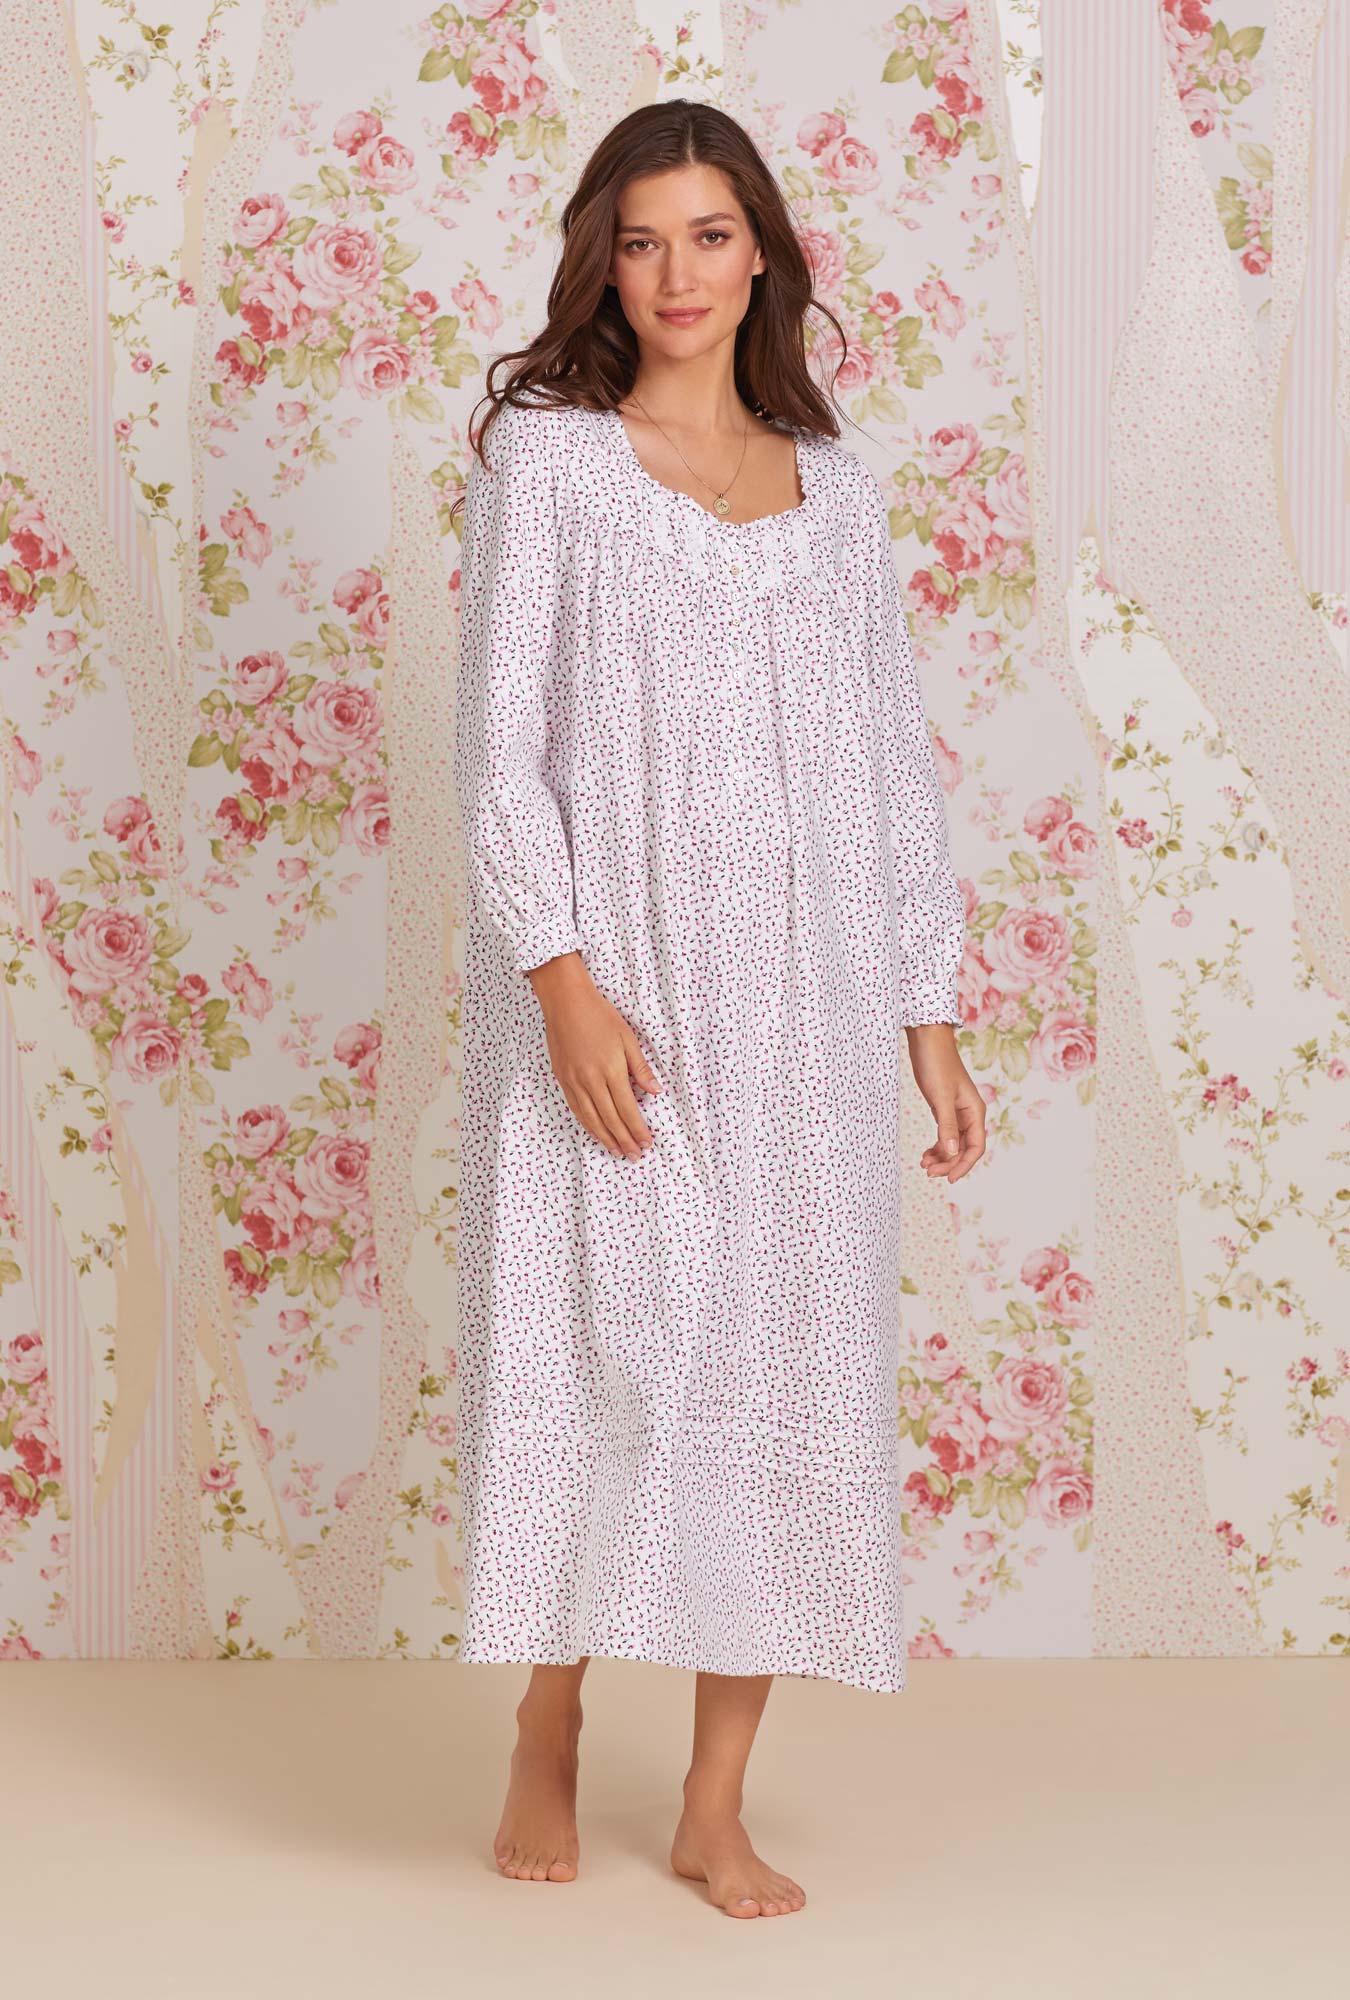 A lady wearing white long sleeve cotton flannel long nightgown with joyful berry print.